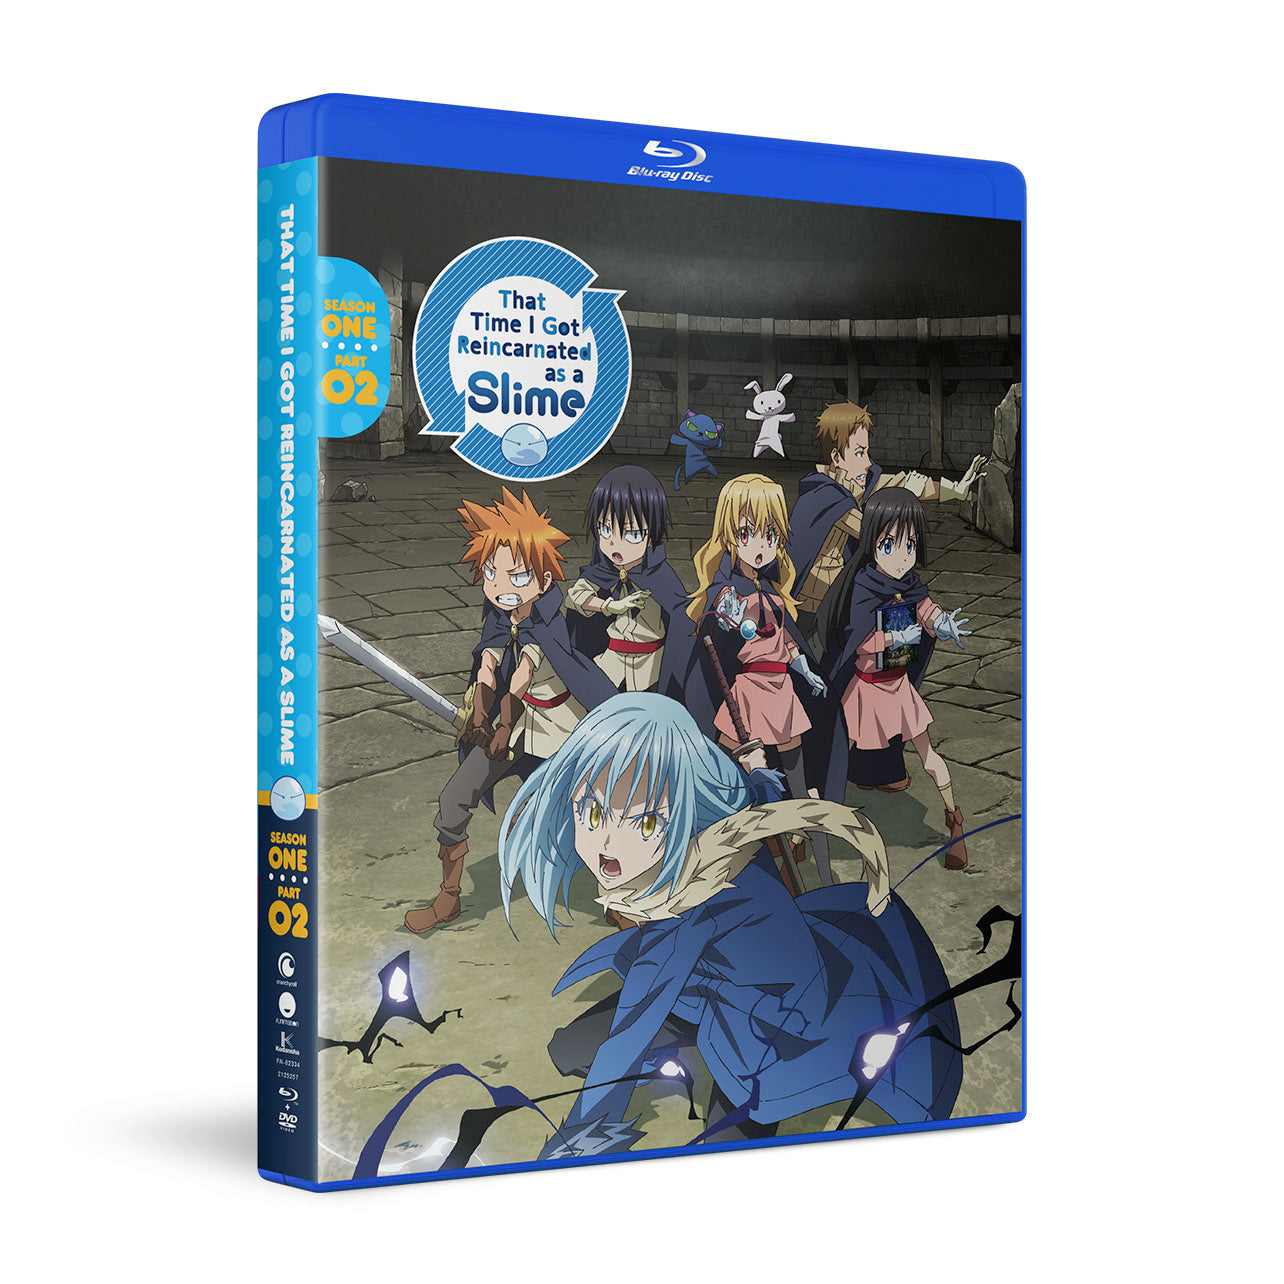 That Time I Got Reincarnated as a Slime - Season 1 Part 2 - Blu-ray + DVD image count 1